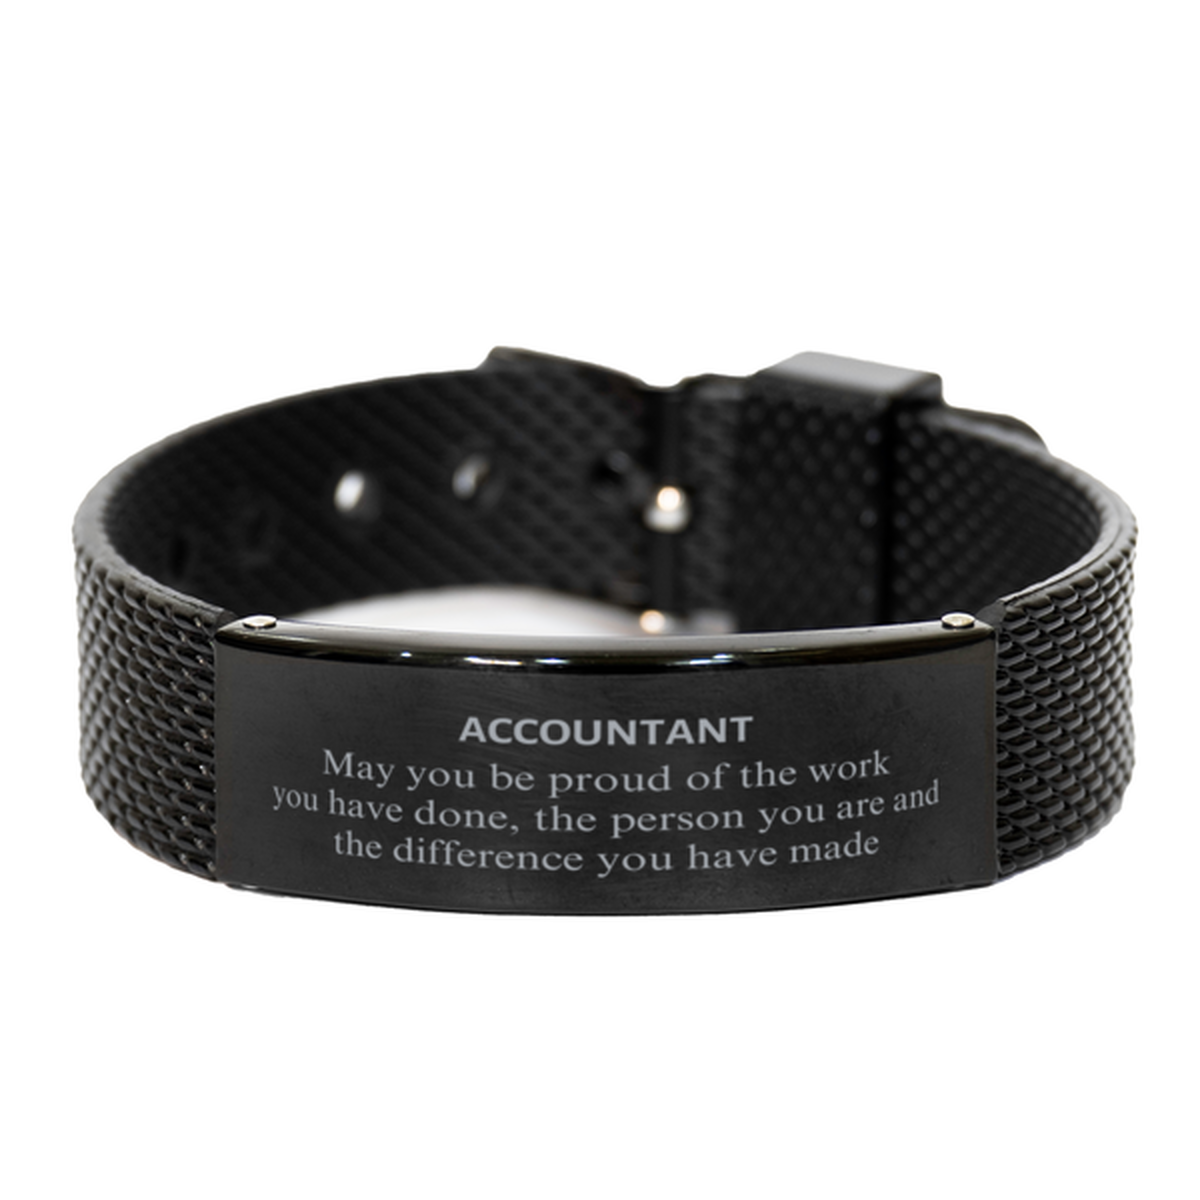 Accountant May you be proud of the work you have done, Retirement Accountant Black Shark Mesh Bracelet for Colleague Appreciation Gifts Amazing for Accountant